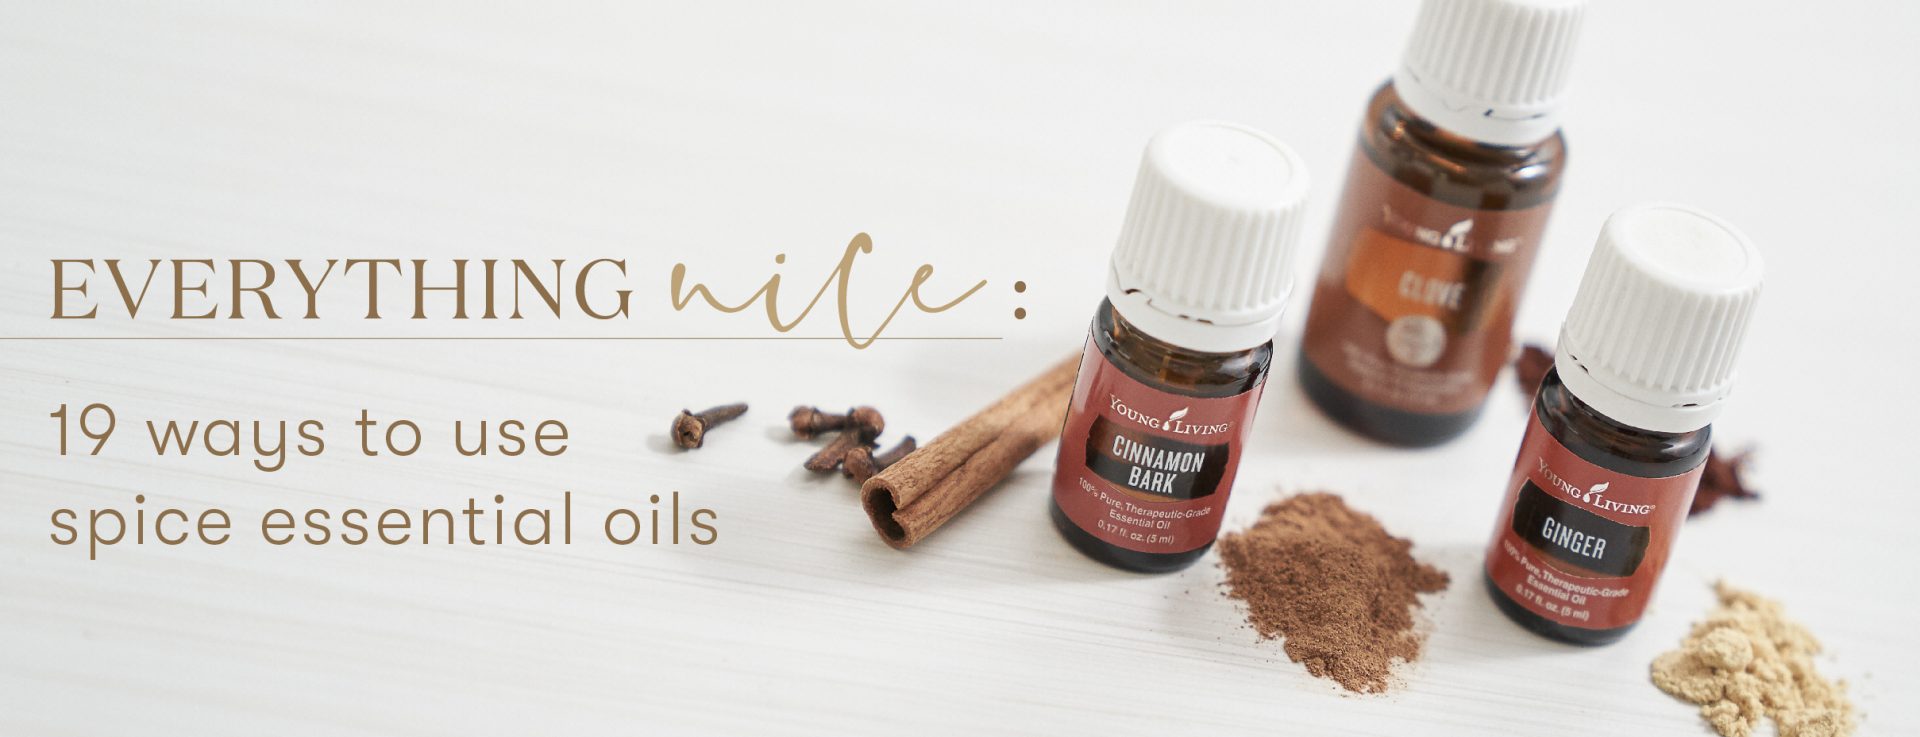 Everything nice, 19 ways to use spice essential oils